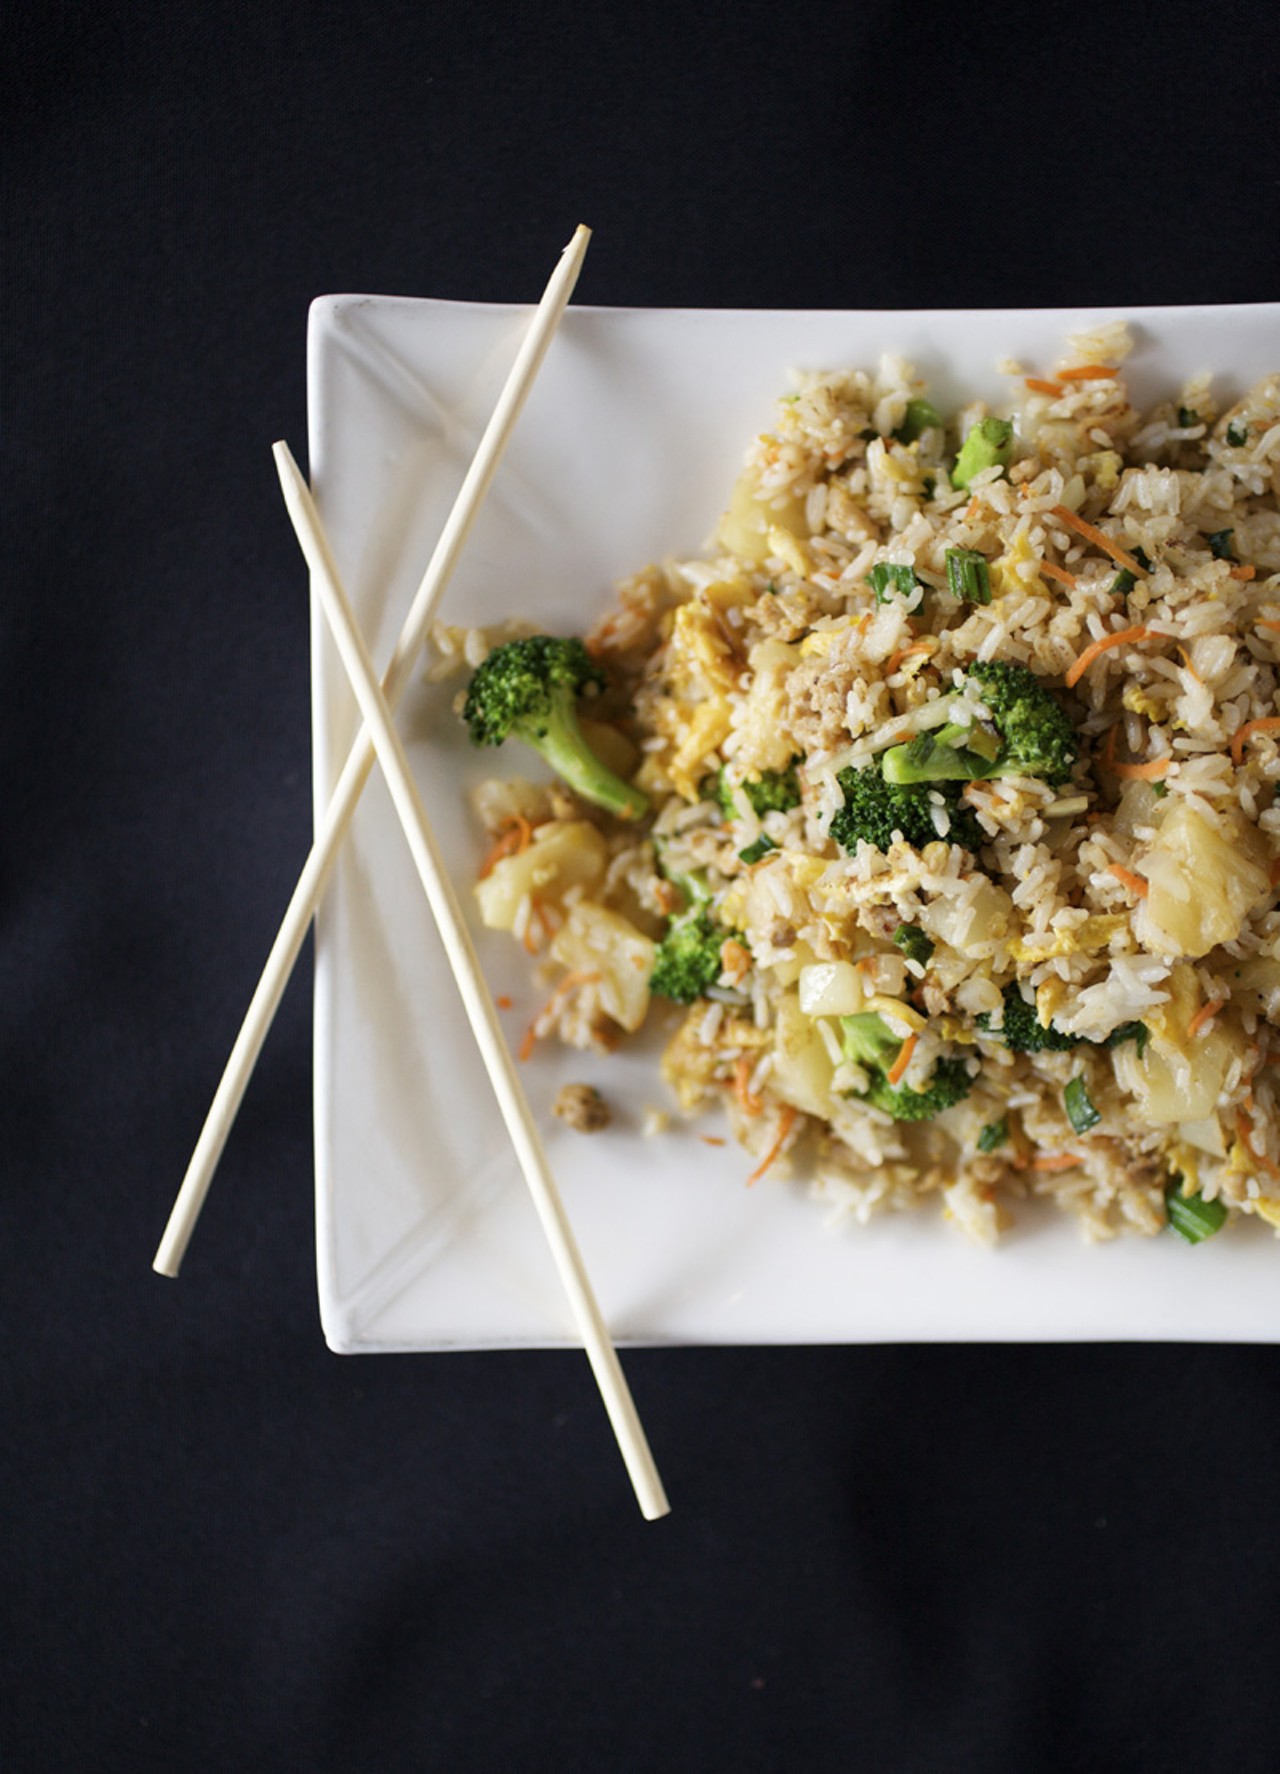 Pineapple Fried Rice is prepared with stir-fried eggs, pineapple, scallions, curry sauce and onions. It is served with your choice of beef, chicken or shrimp.